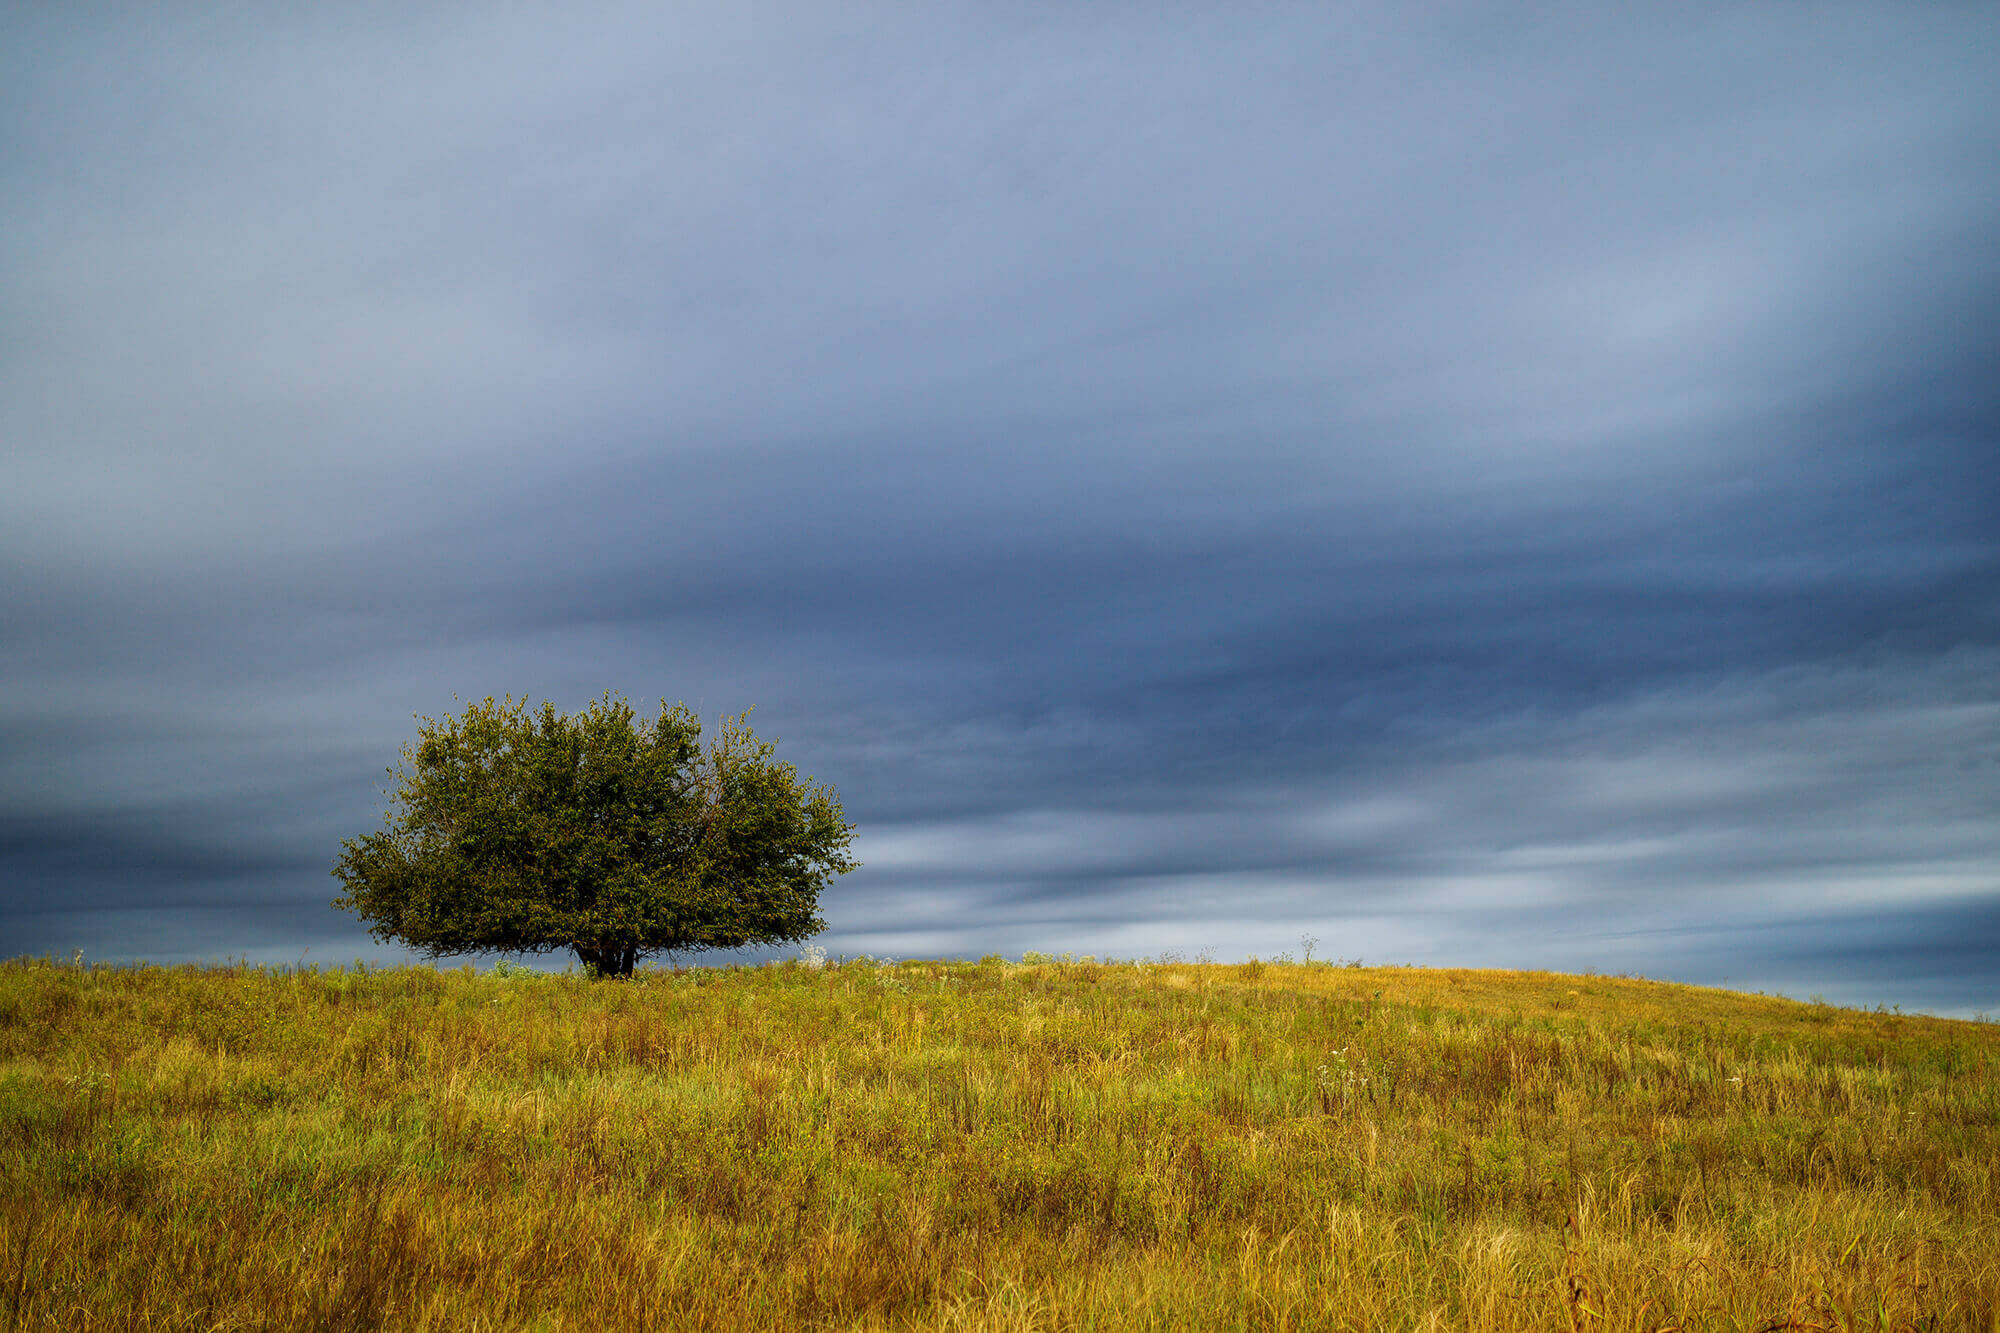 Tree in Pasture under cloudy sky